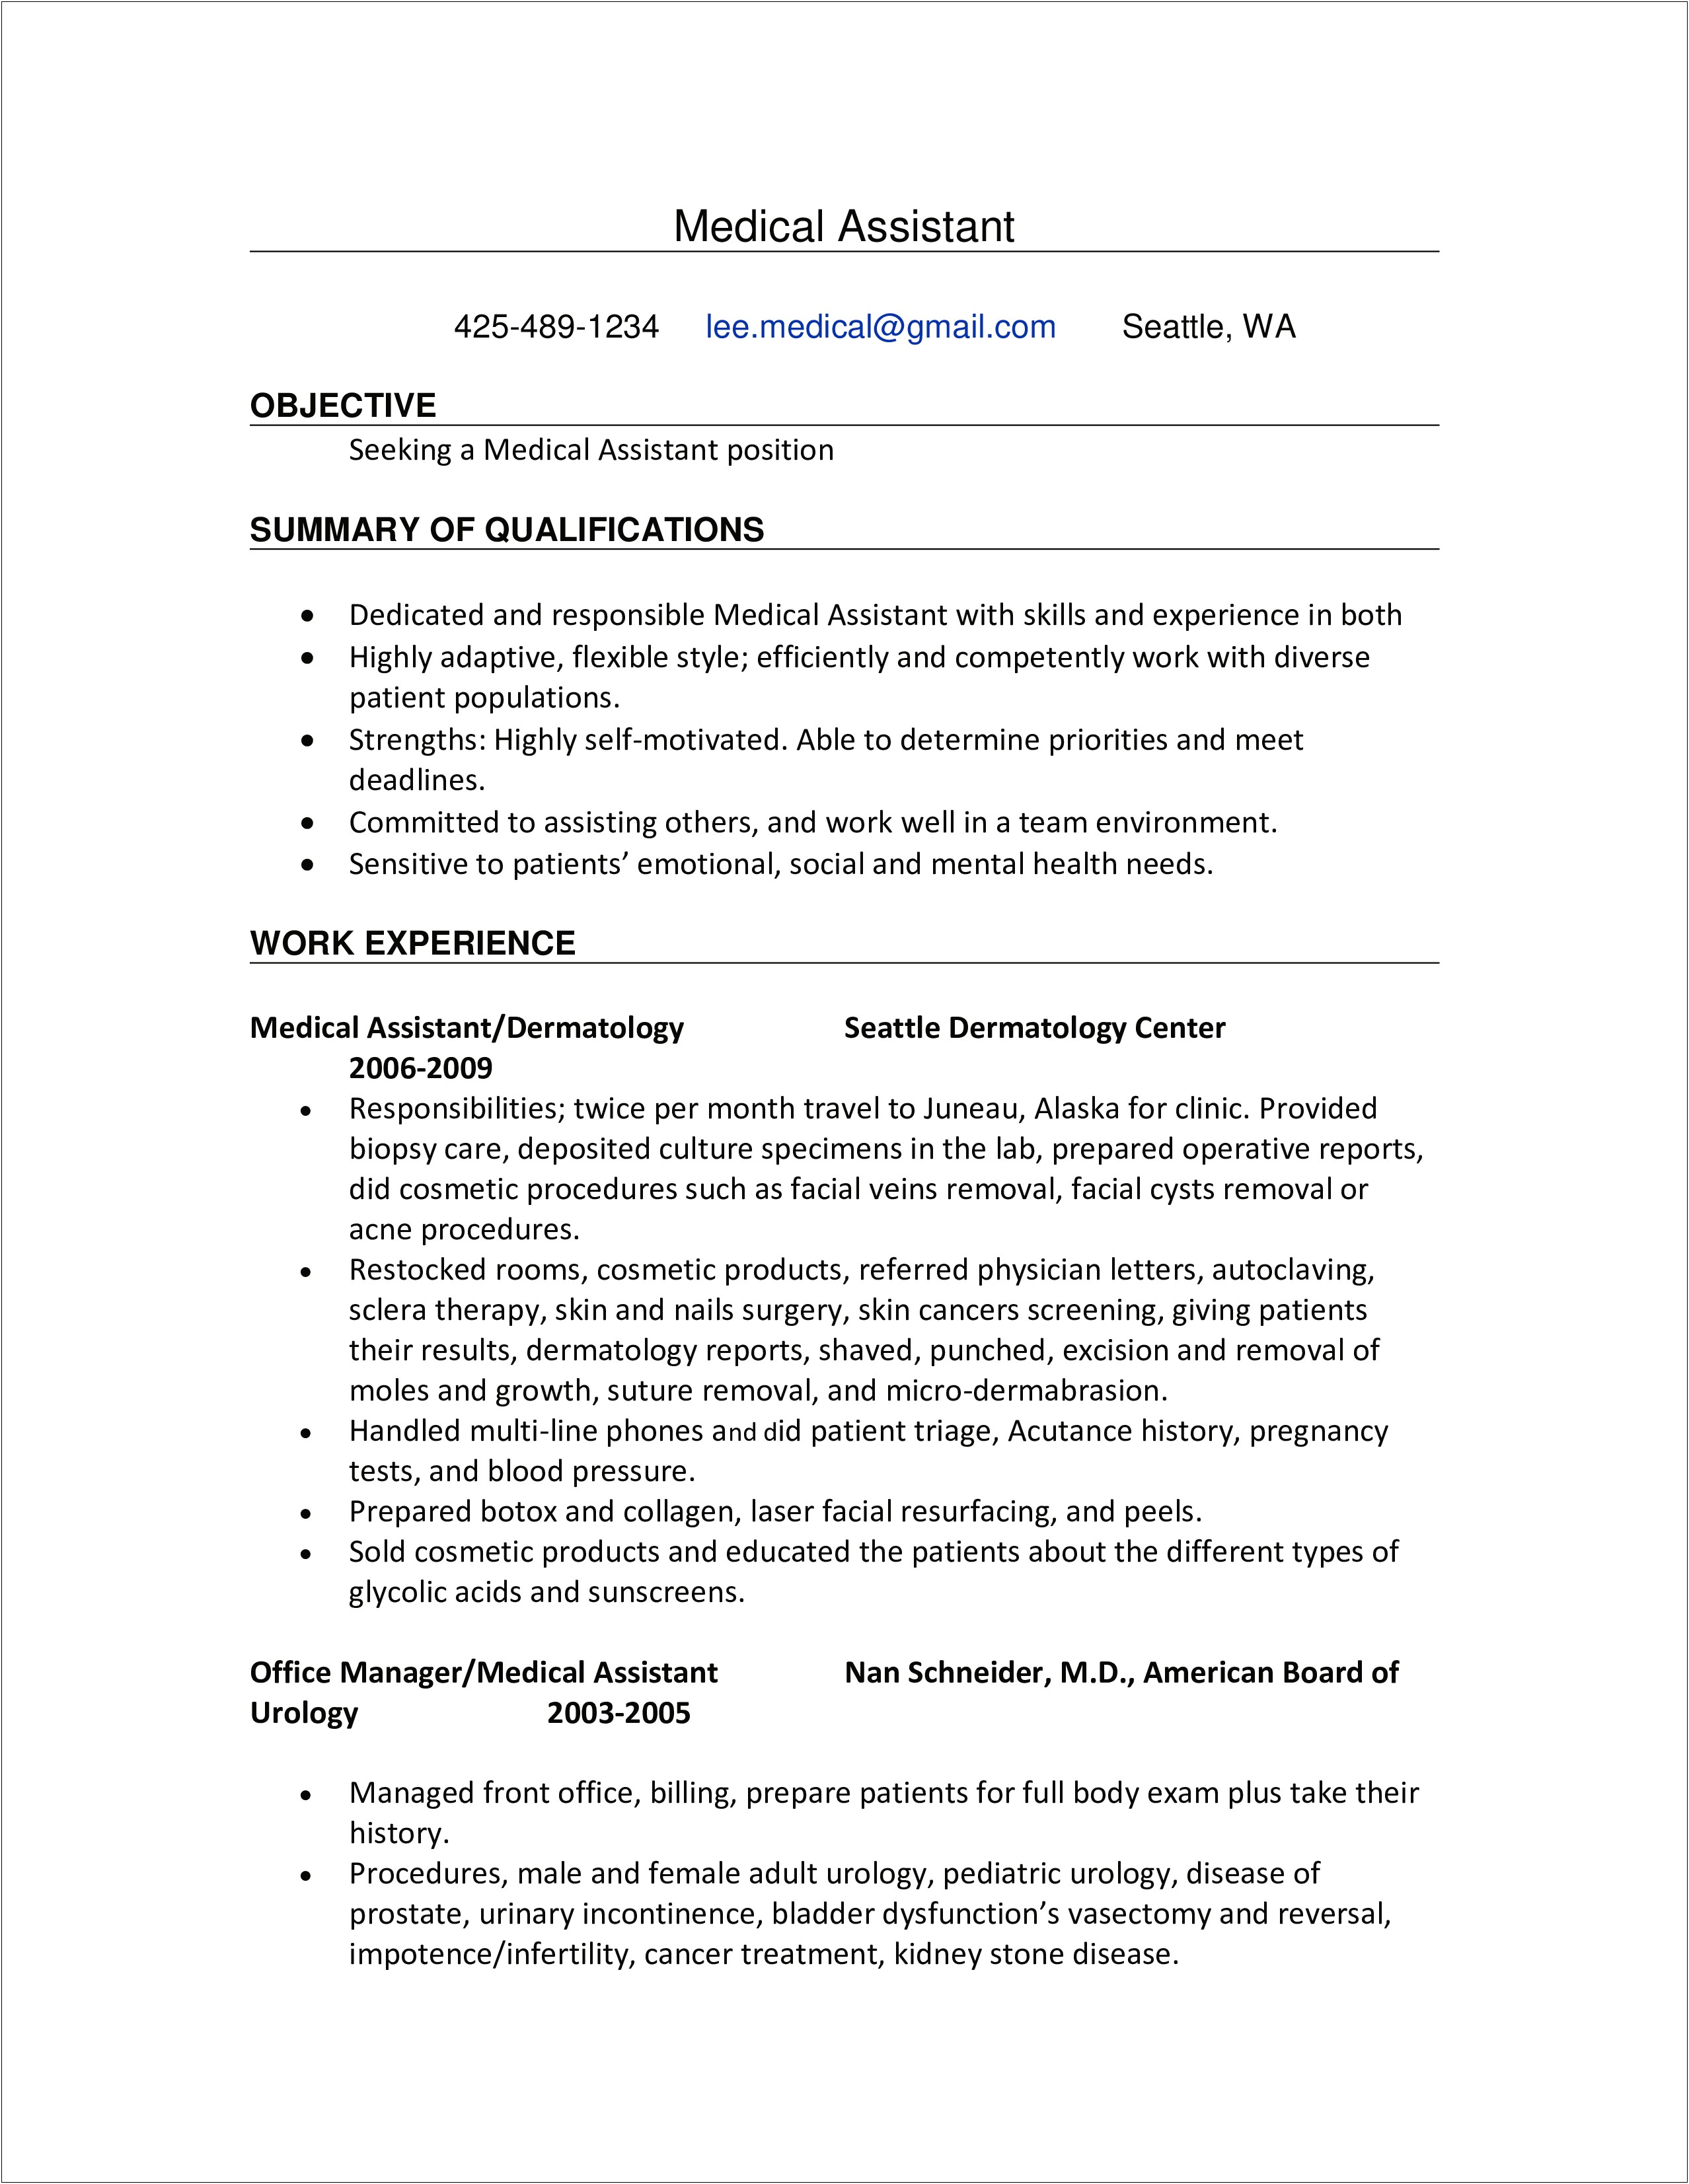 Medical Support Assistant Summary For Resume